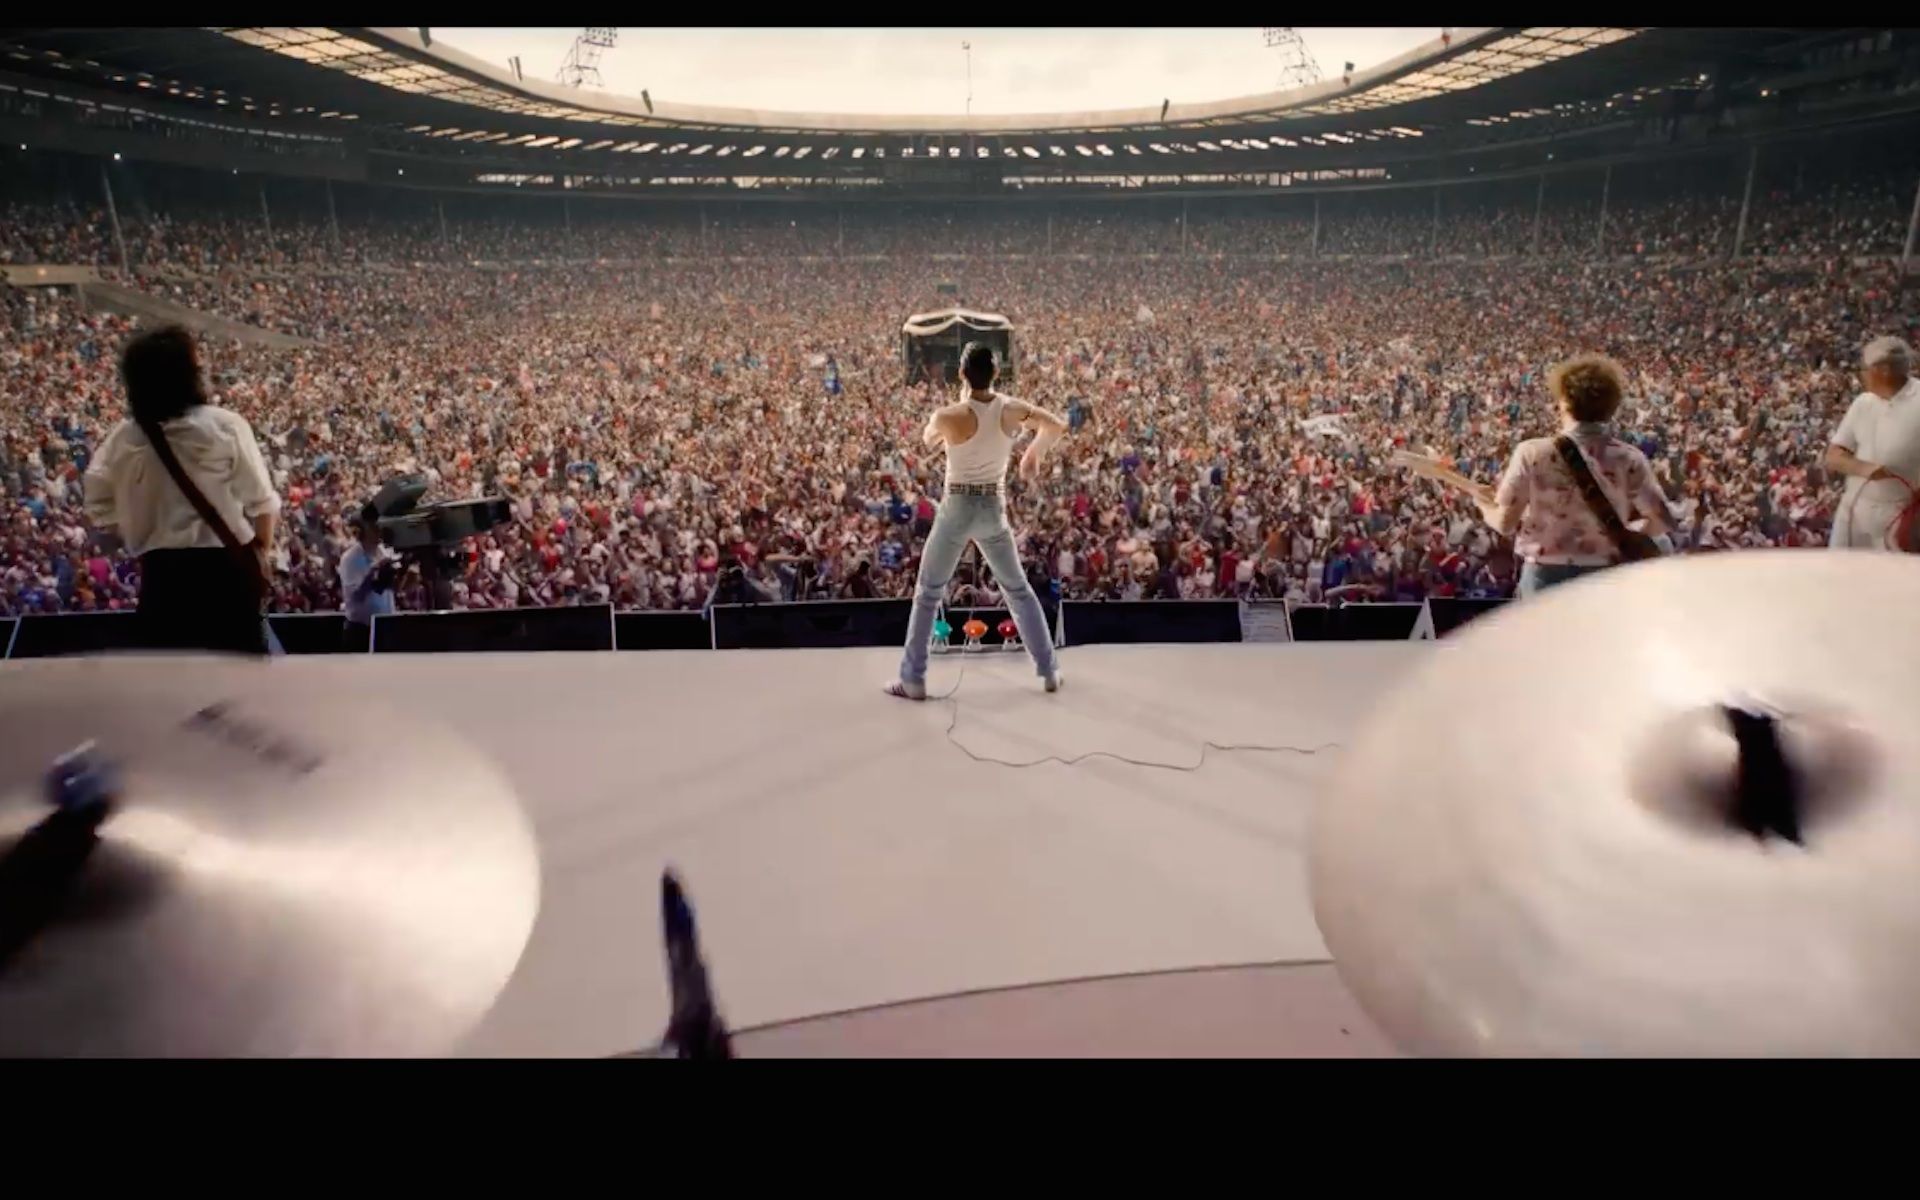 Bohemian Rhapsody' Trailer: All hail the one and only Queen